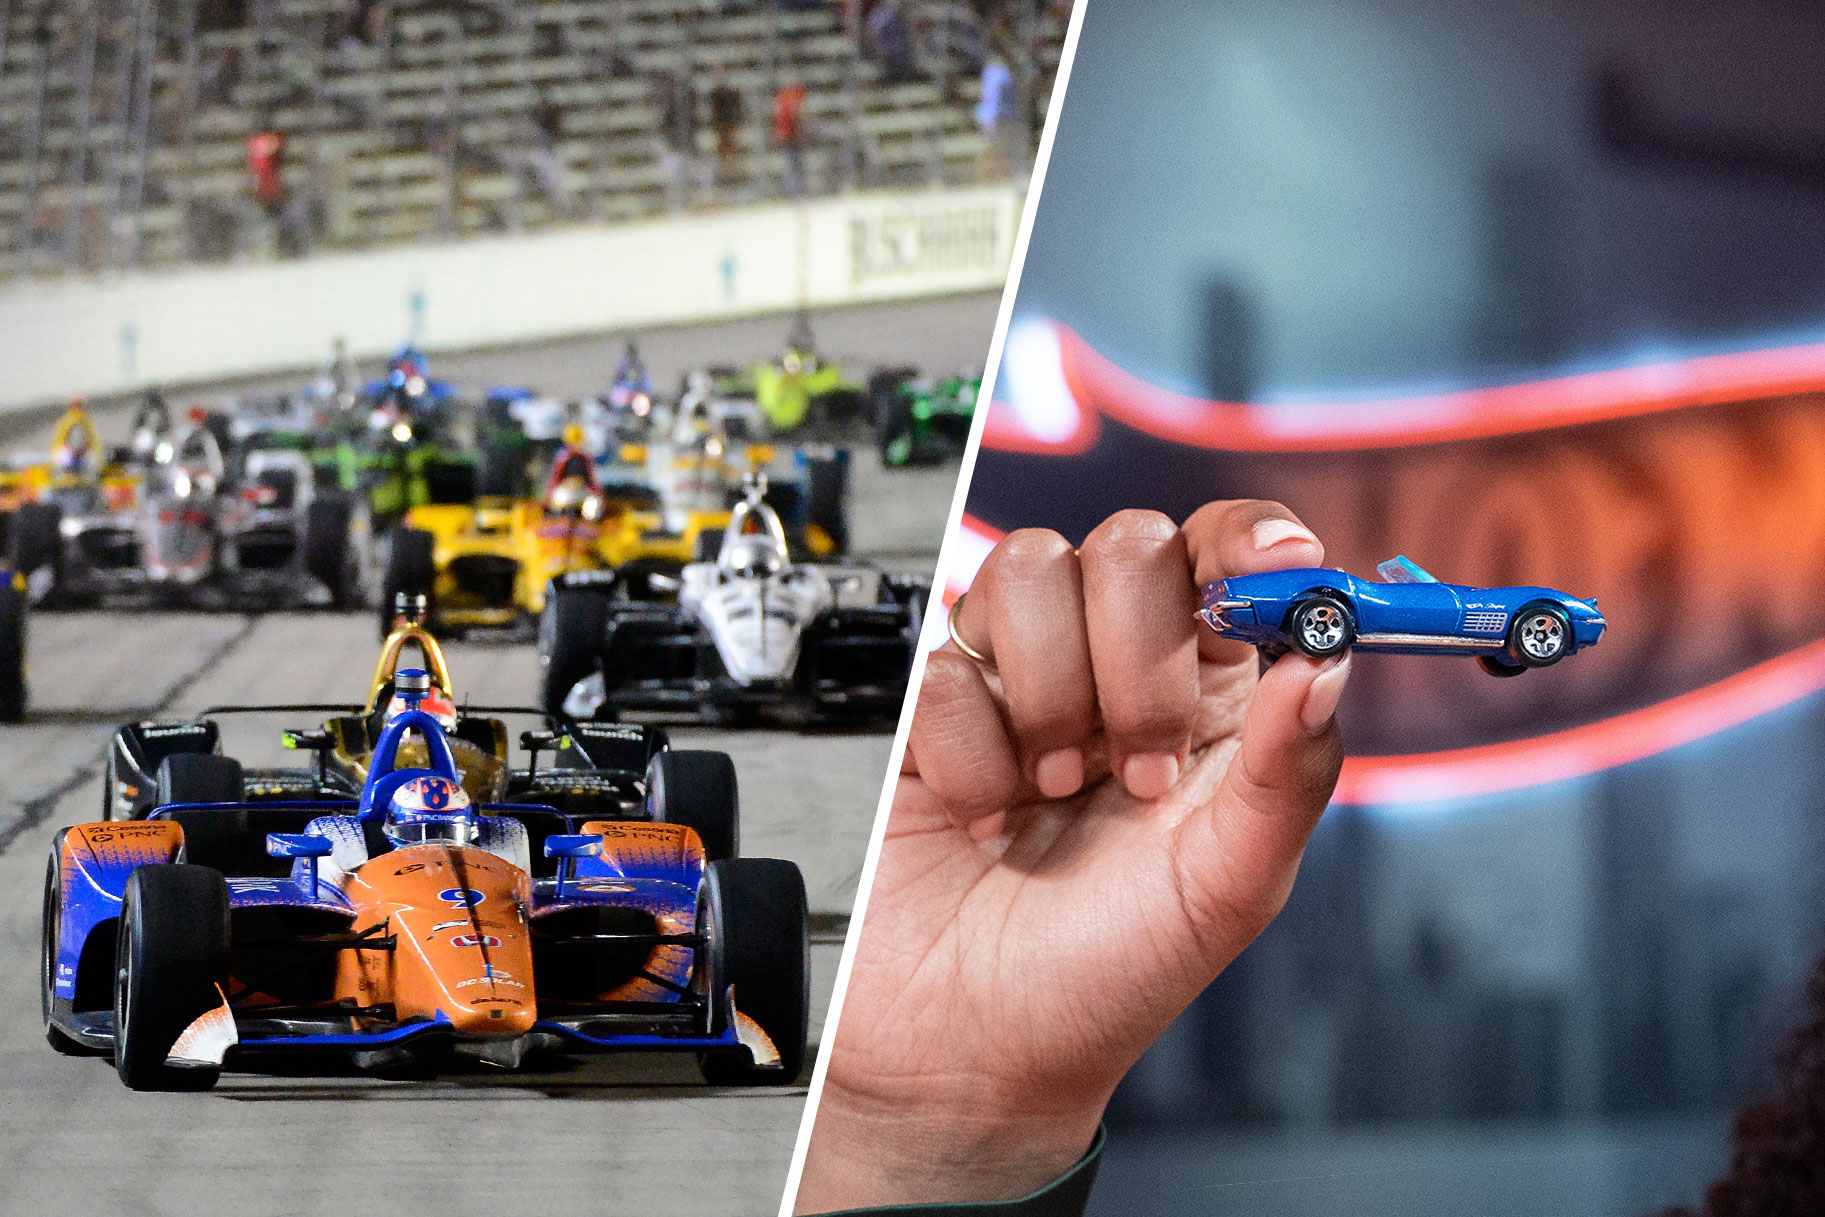 Split image of an IndyCar race and a hot wheels toy car